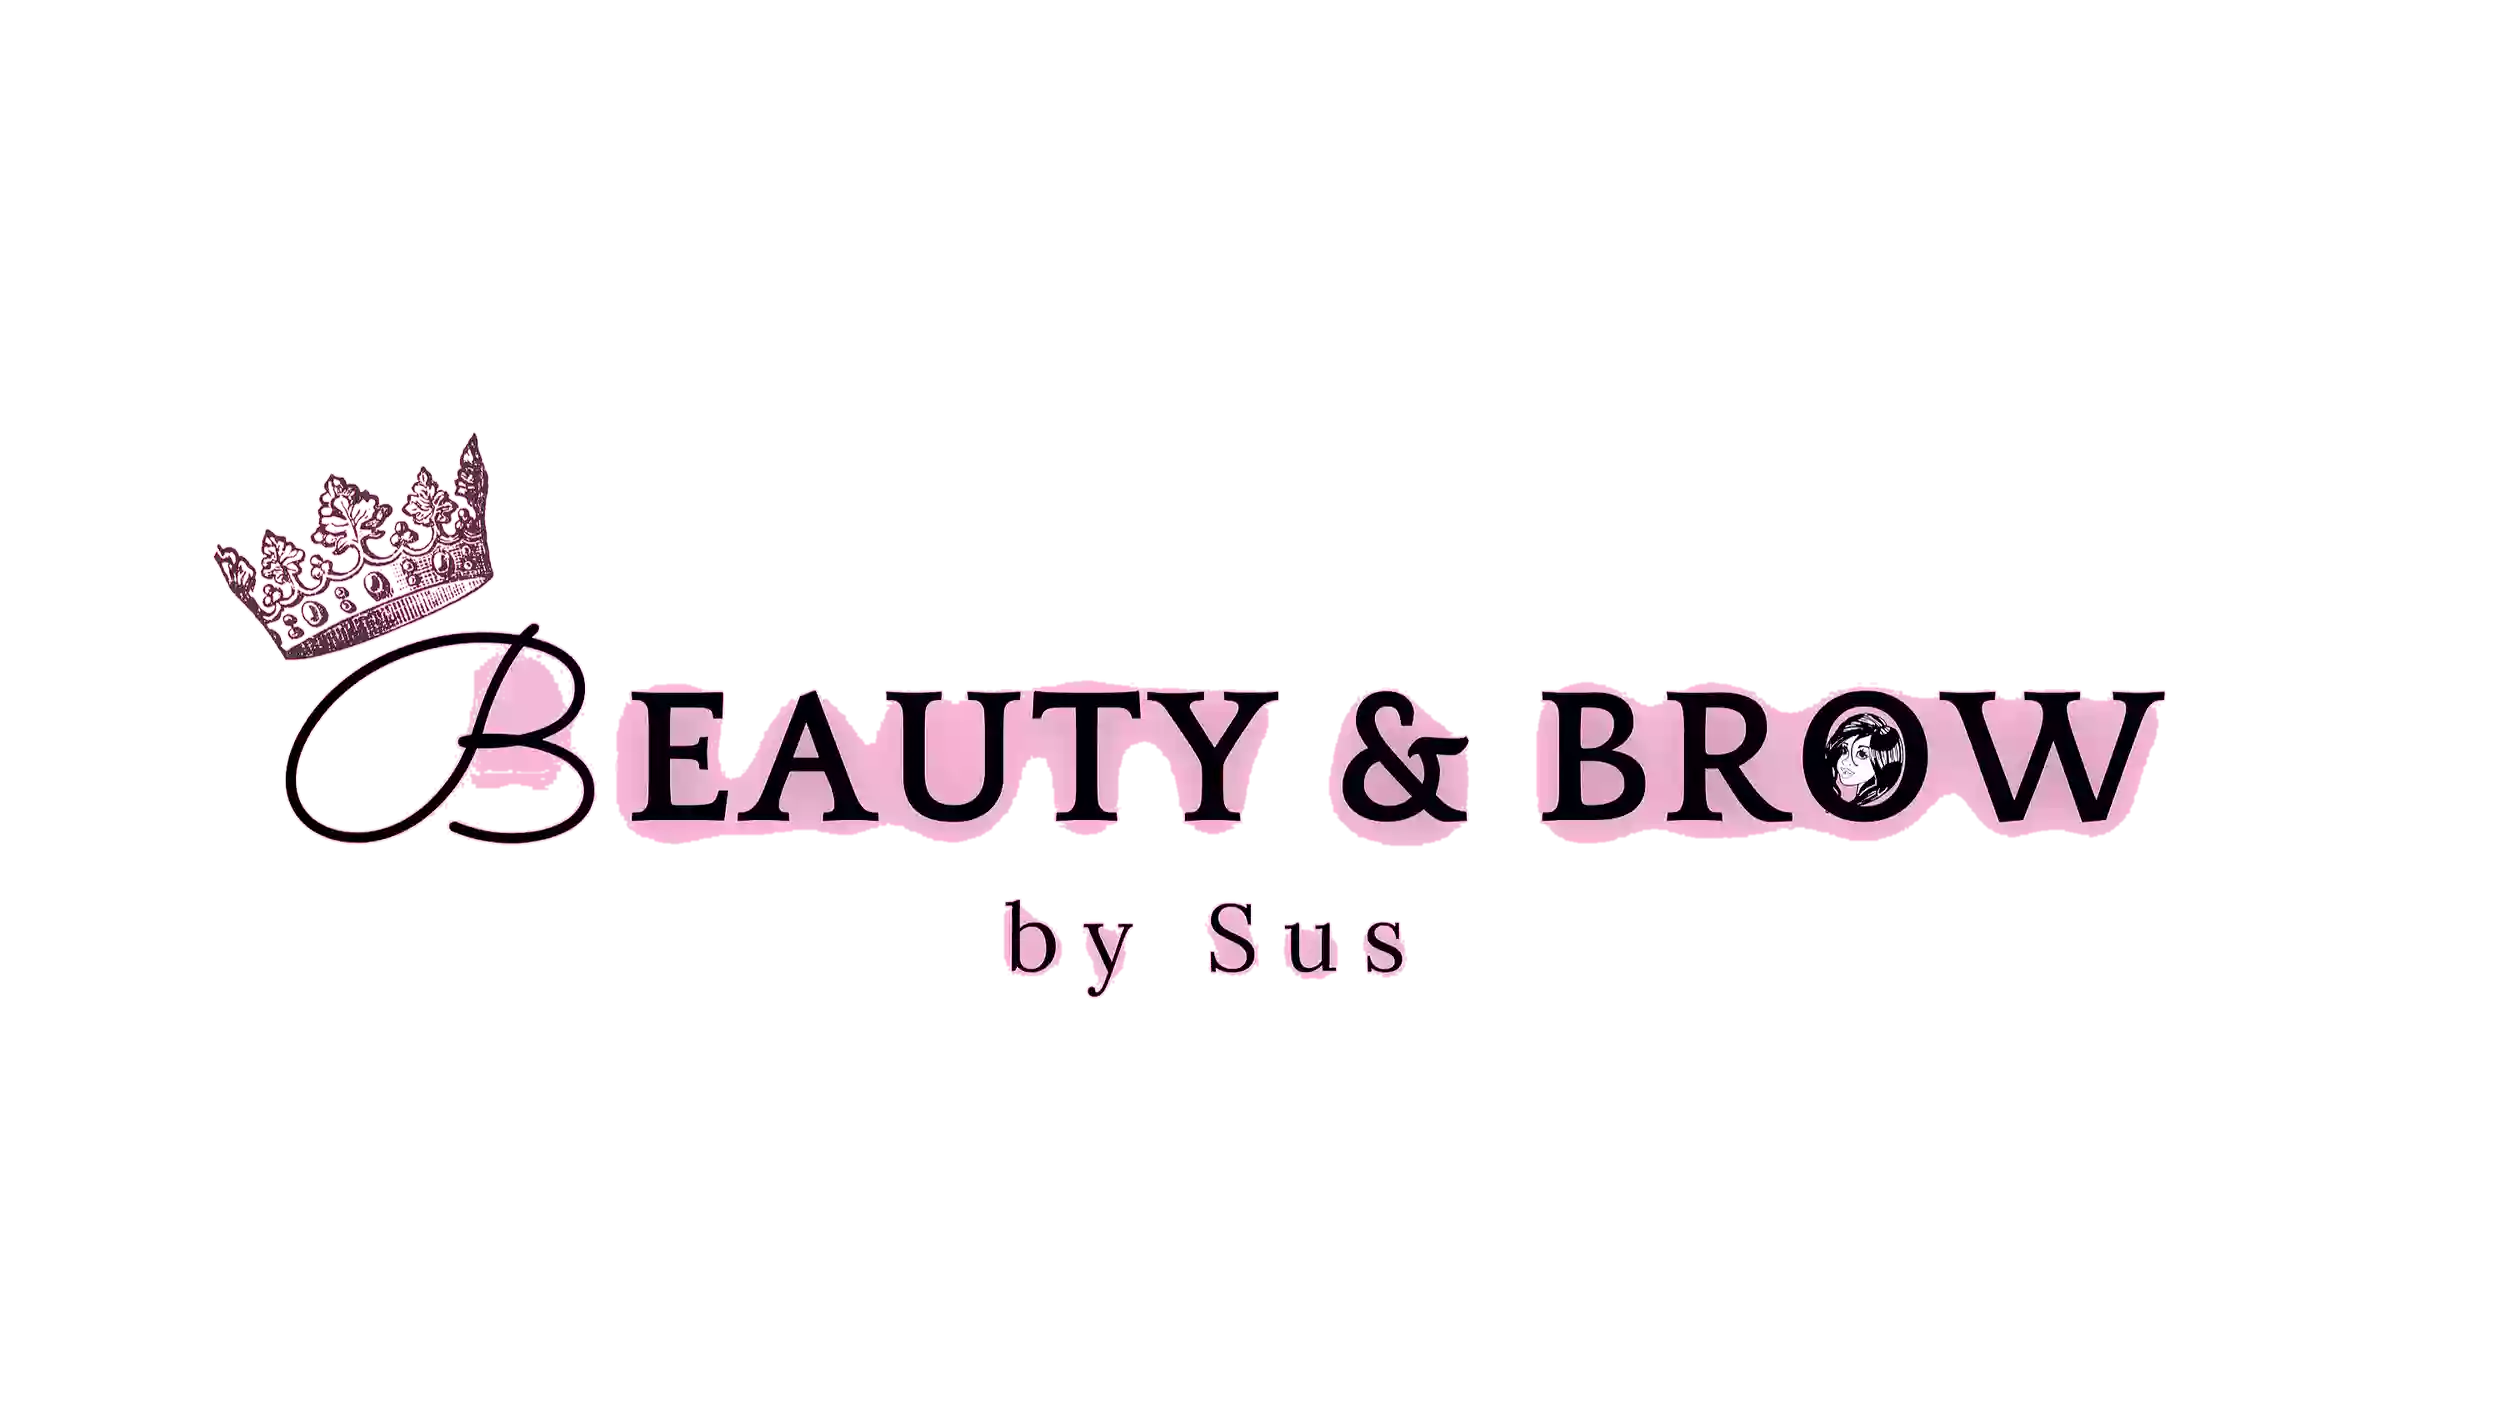 Beauty & Brow by Sus